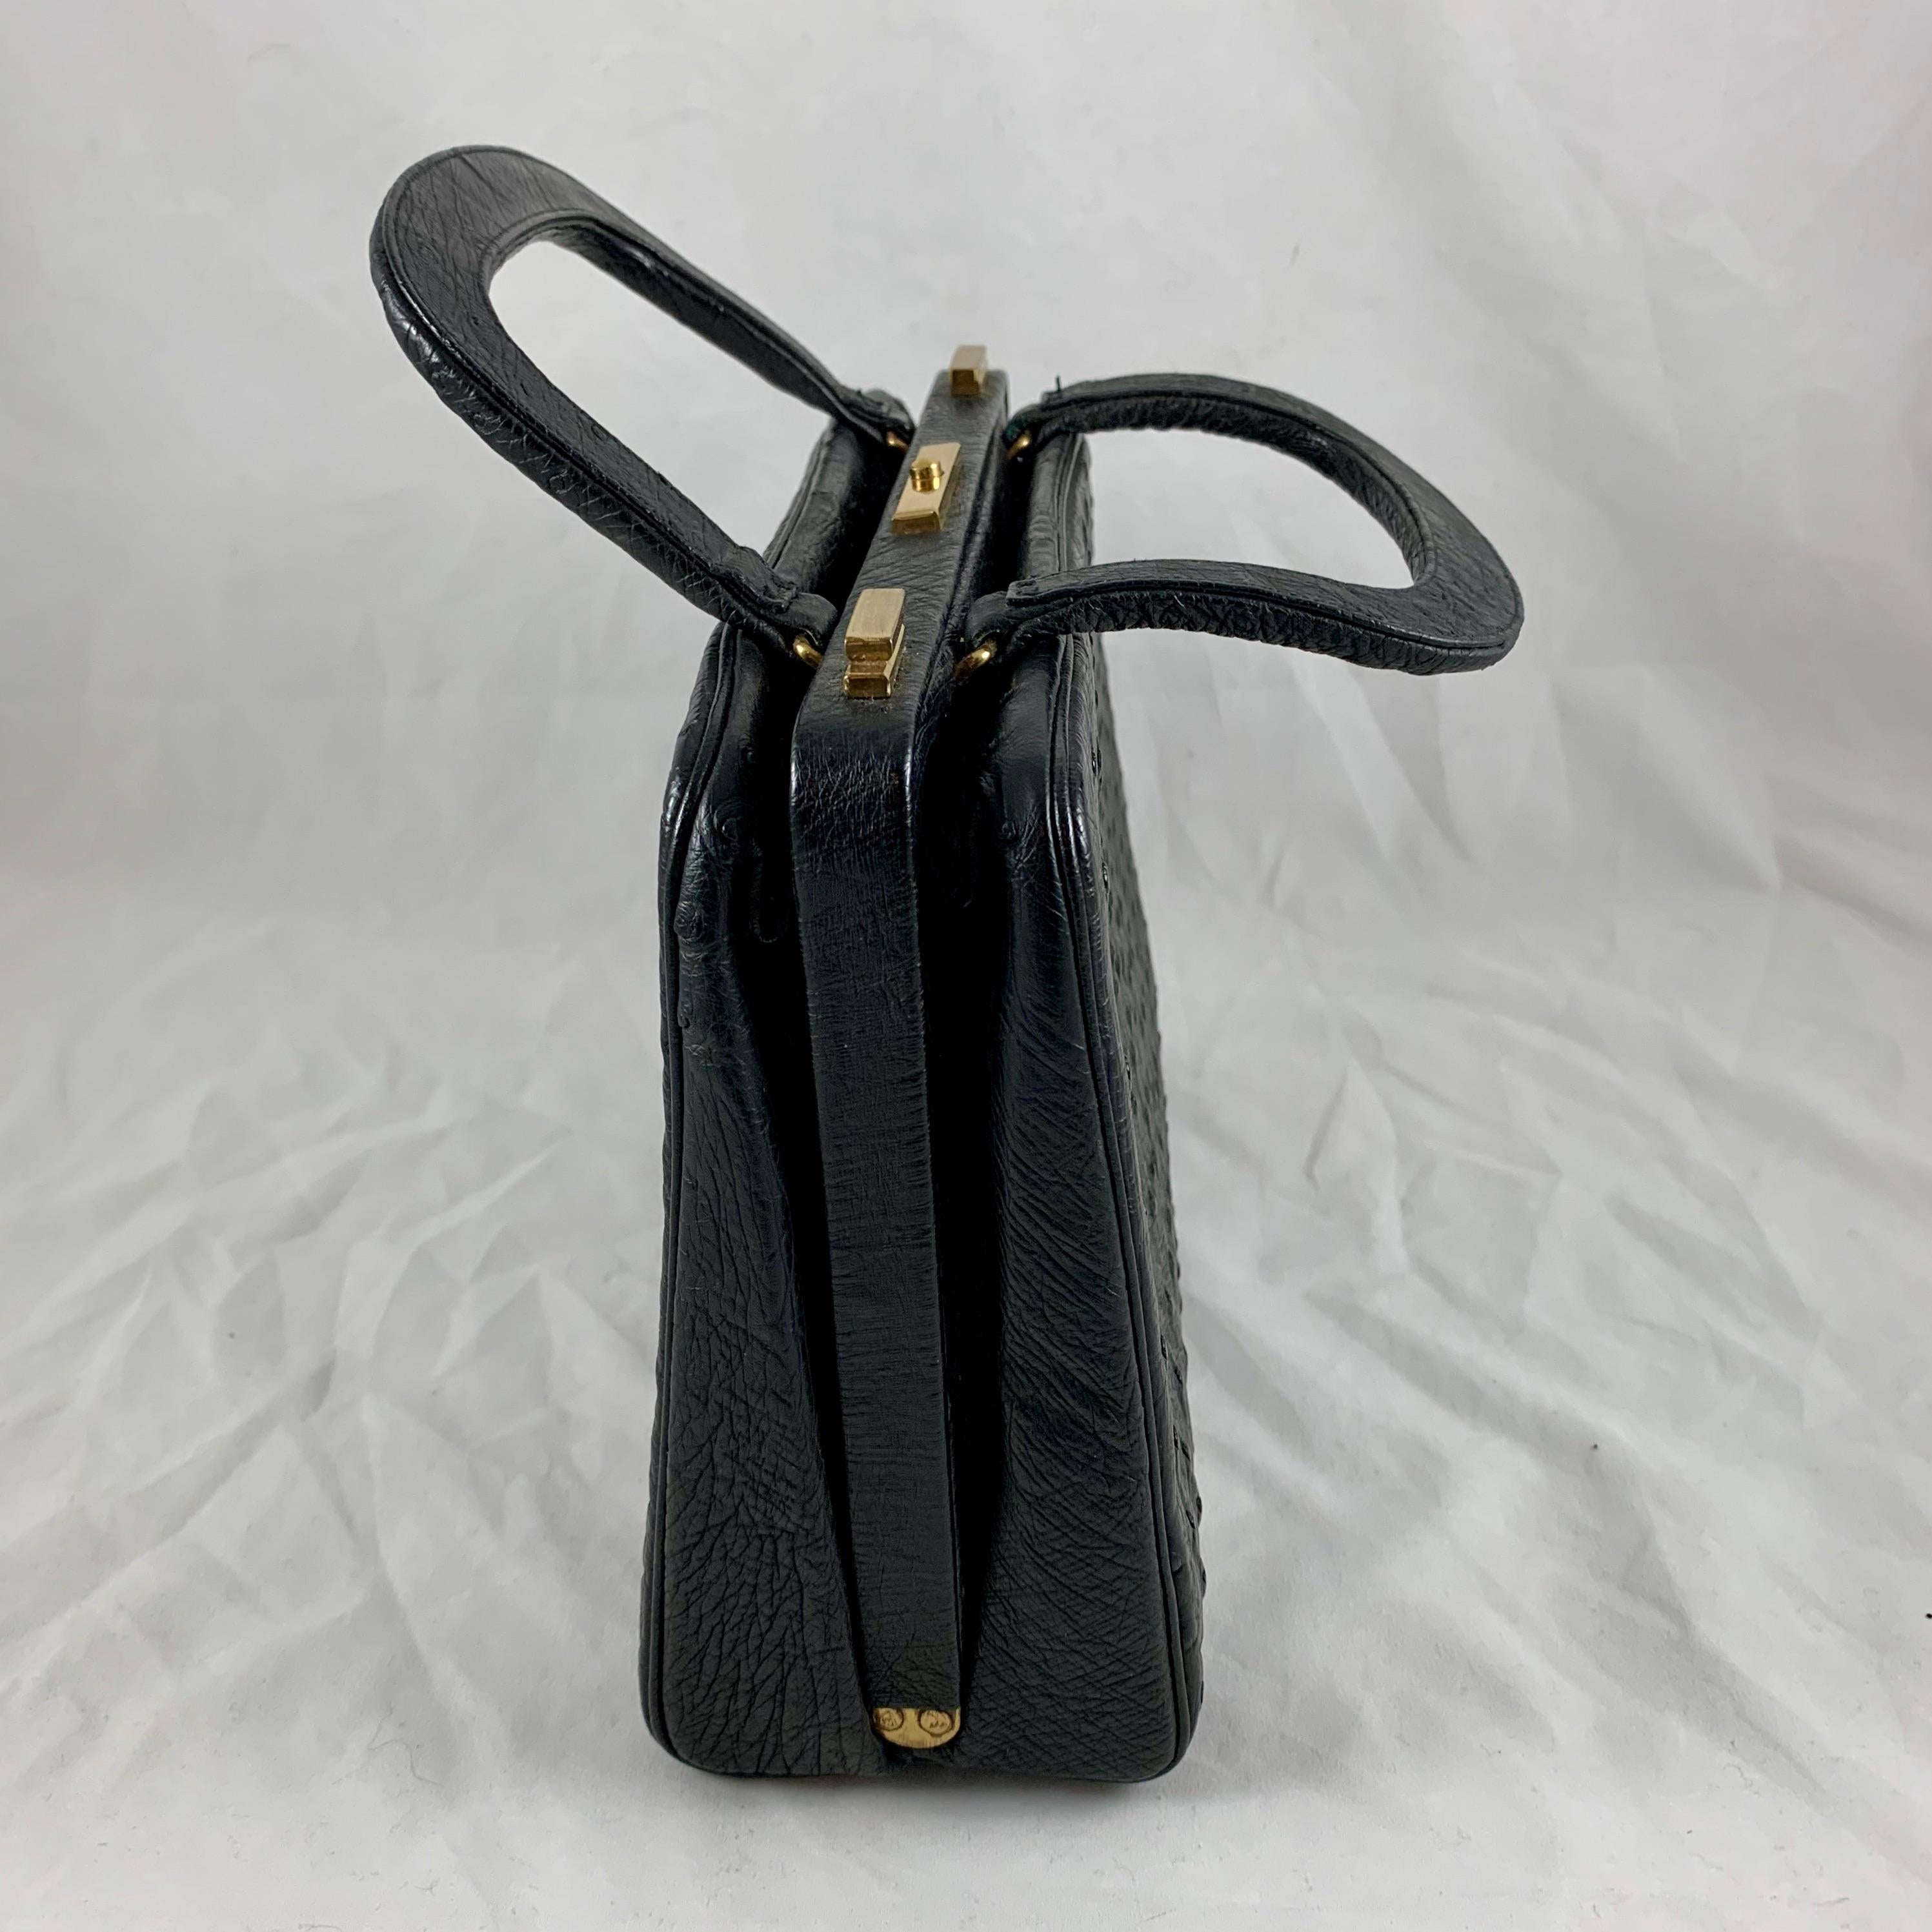 Koret Black Ostrich, Red Leather Structured Ladies Handbag and Coin Purse In Good Condition For Sale In Philadelphia, PA